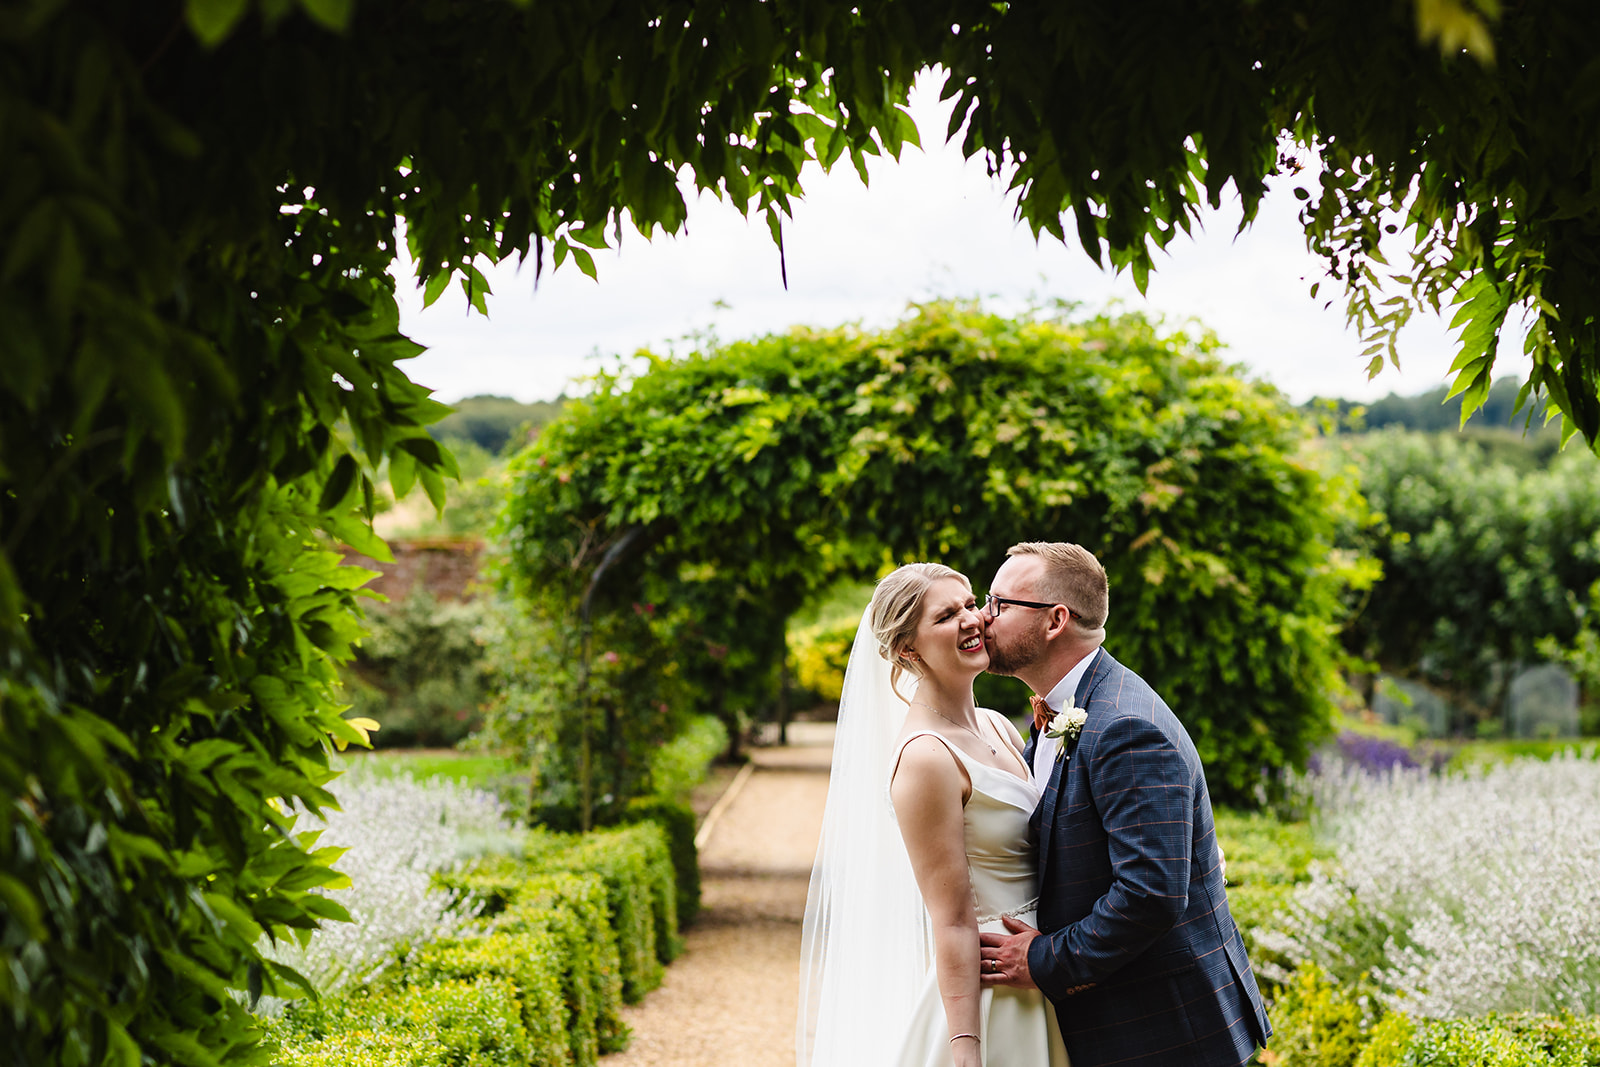 wedding day portrait of bride and groom kissing at Stapleford park by Amanda Forman Photography